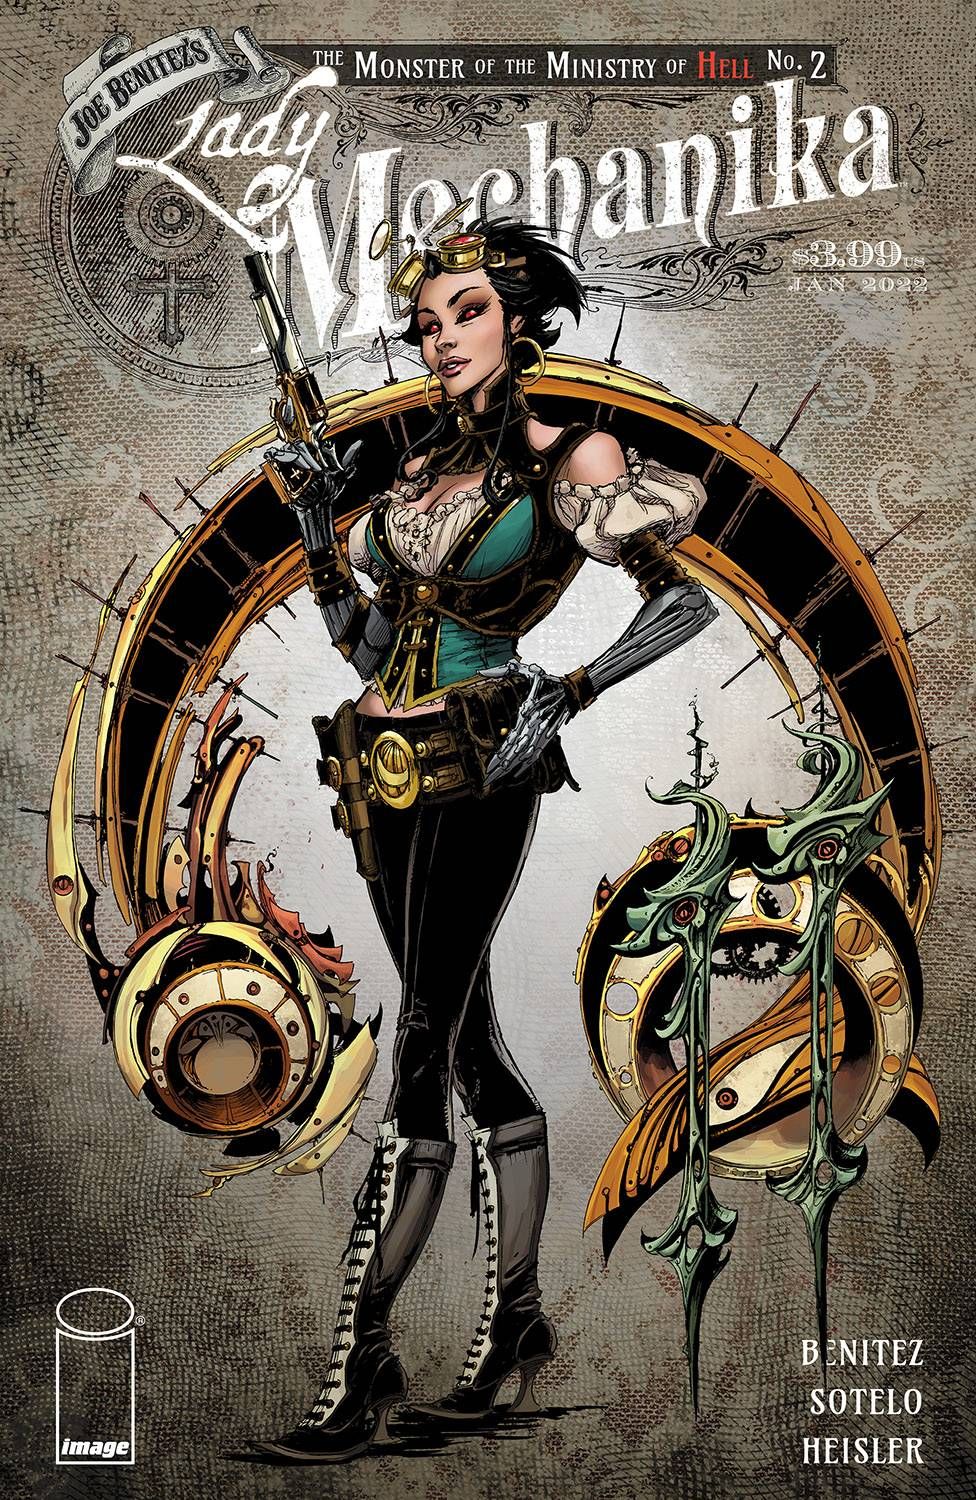 Lady Mechanika: The Monster of the Ministry of Hell #2 Comic